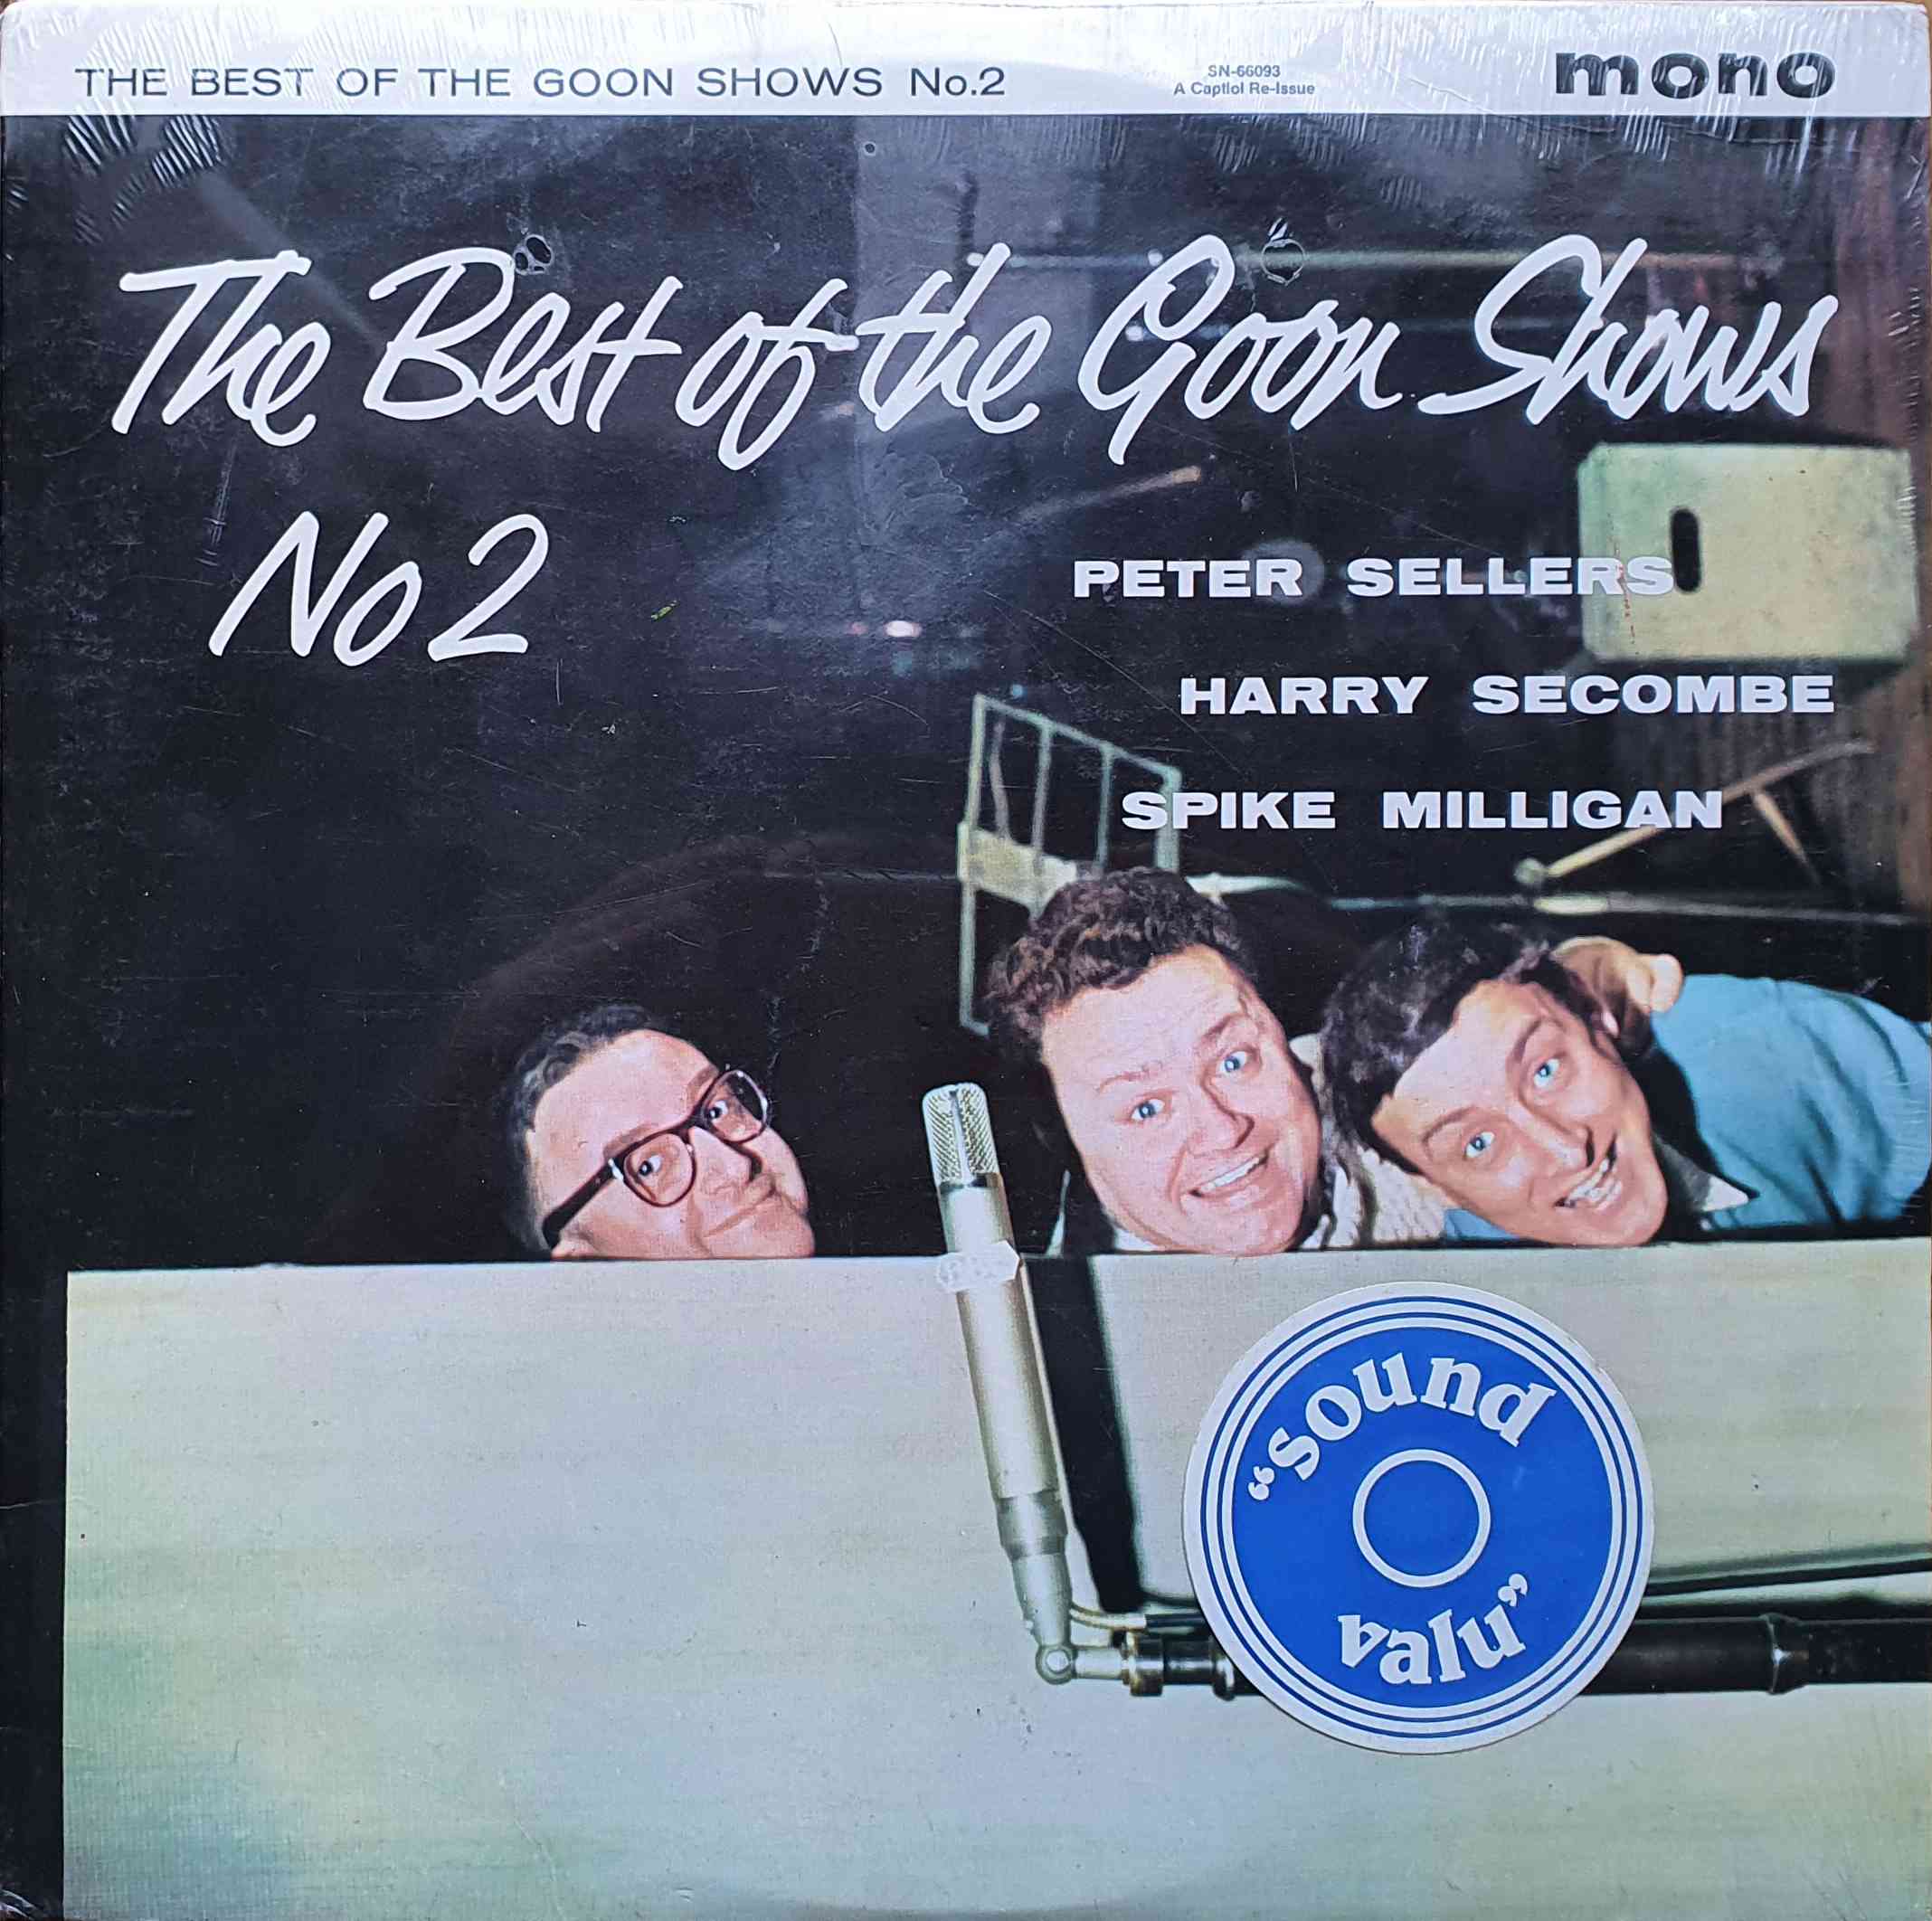 Picture of SN - 66093 The best of the Goon shows No 2 (Canadian import) by artist Spike Milligan / Peter Sellers / Harry Secombe from the BBC albums - Records and Tapes library